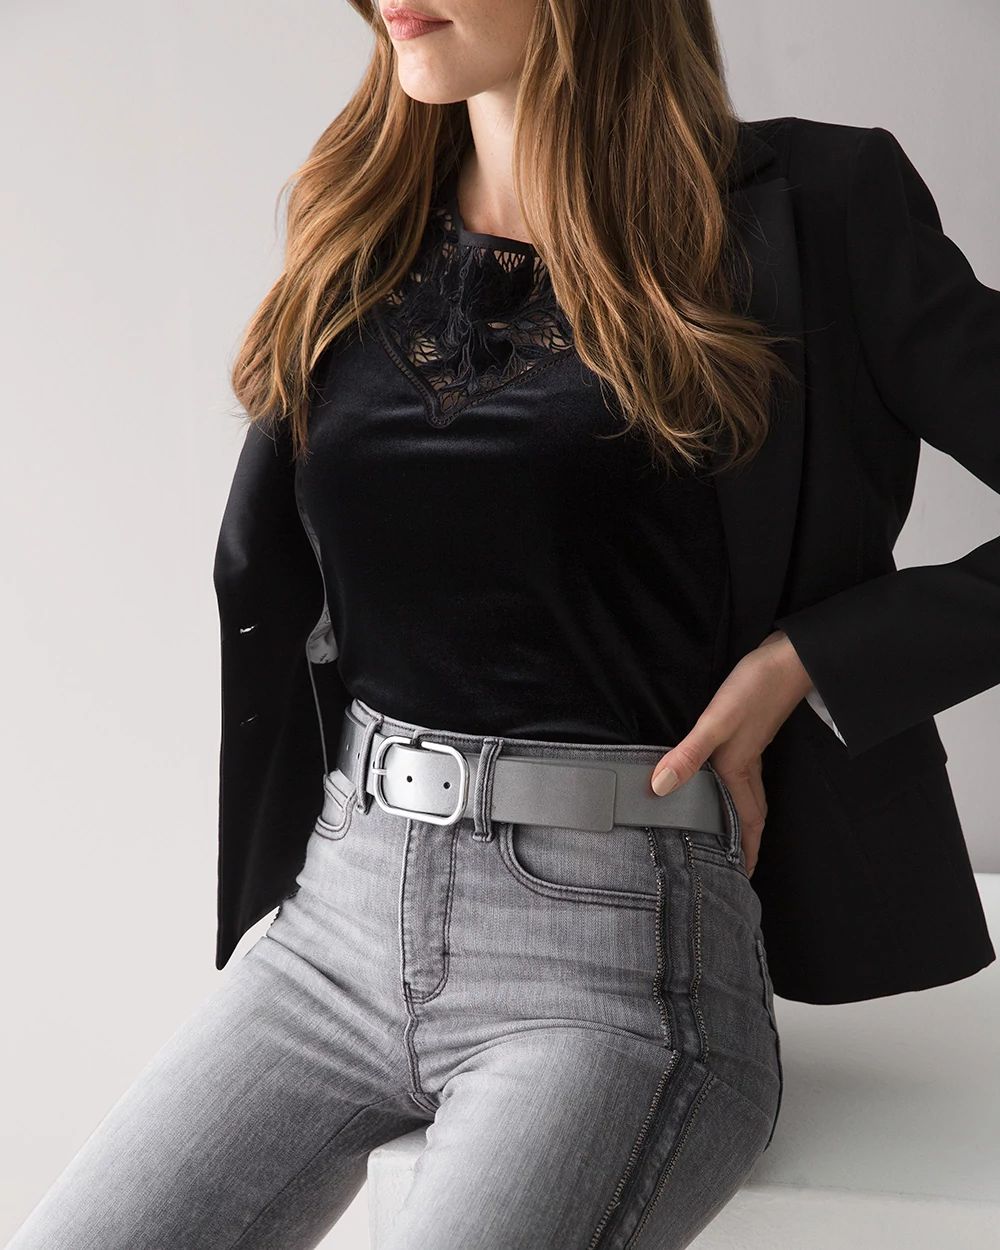 The Perfect Oval Buckle Belt